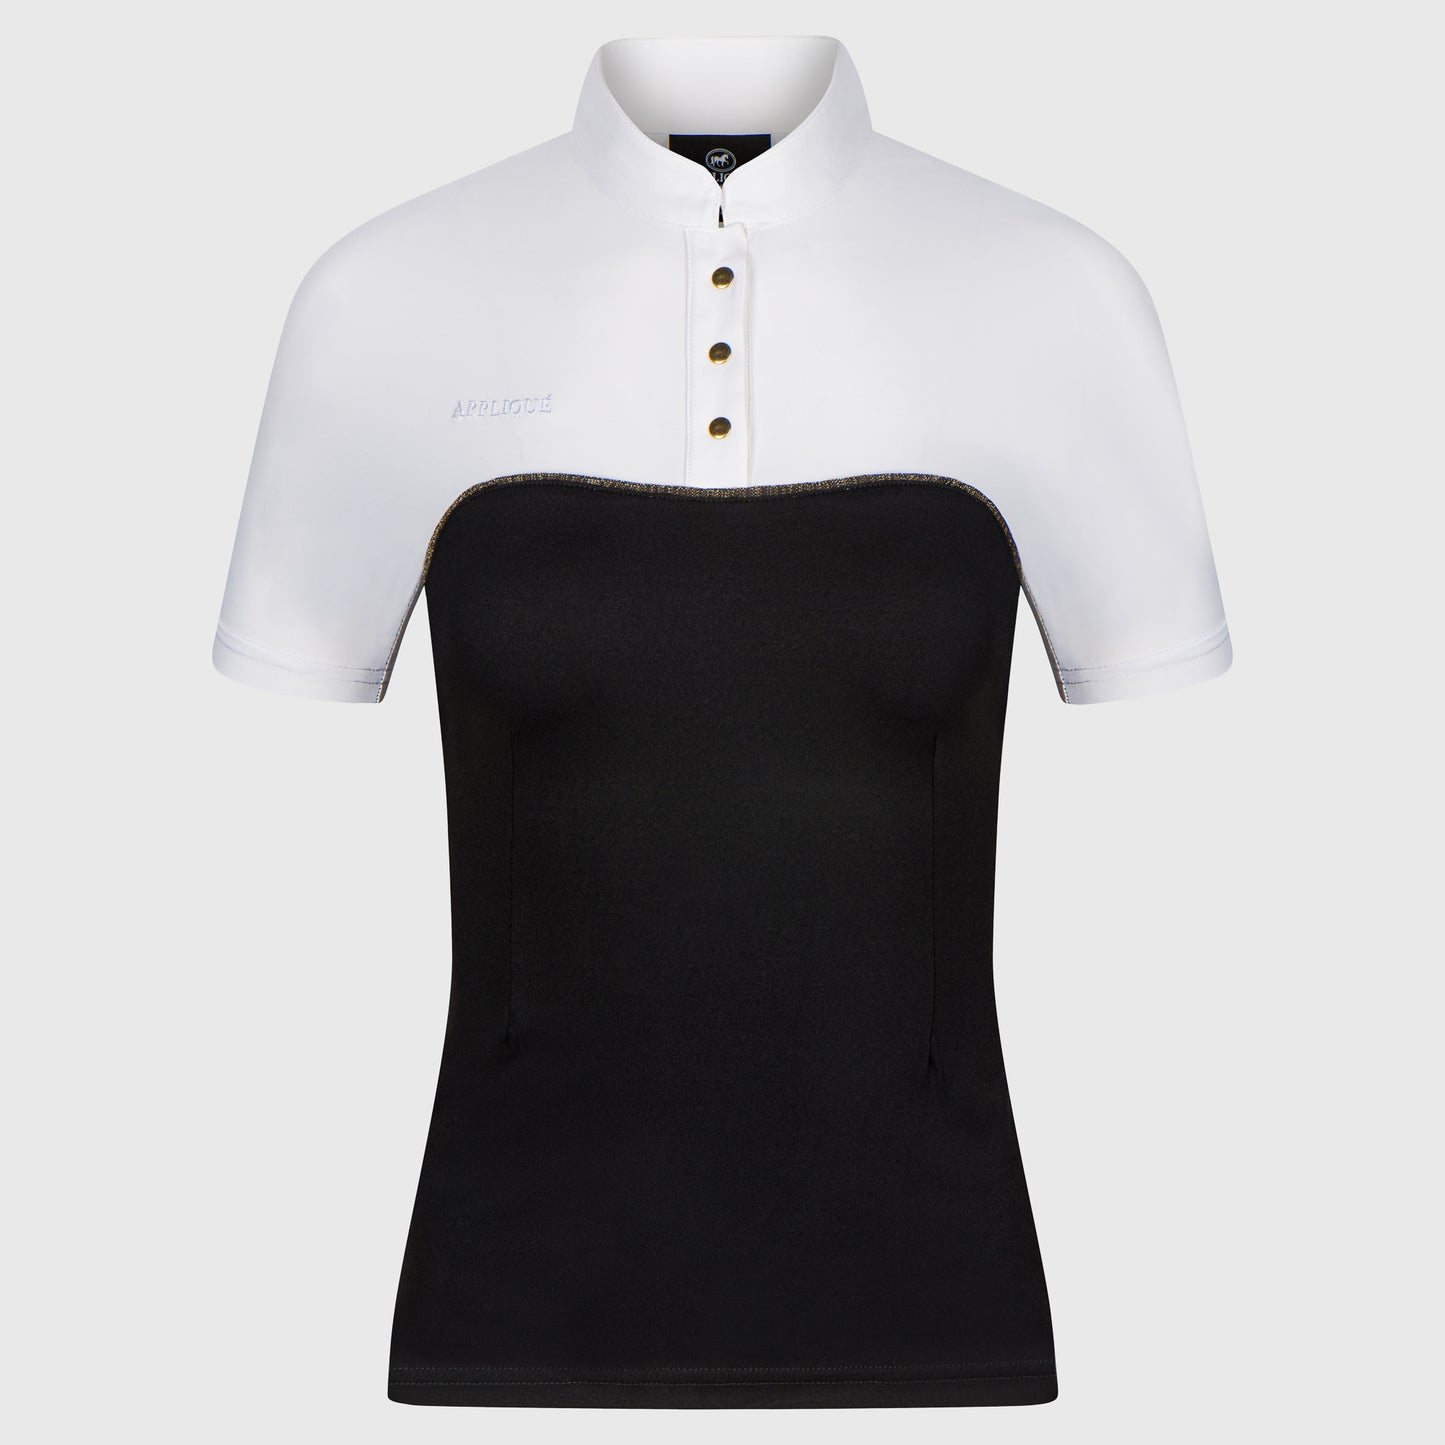 Appliqué Amsterdam Competition Shirt for women with gold details and glitter. 